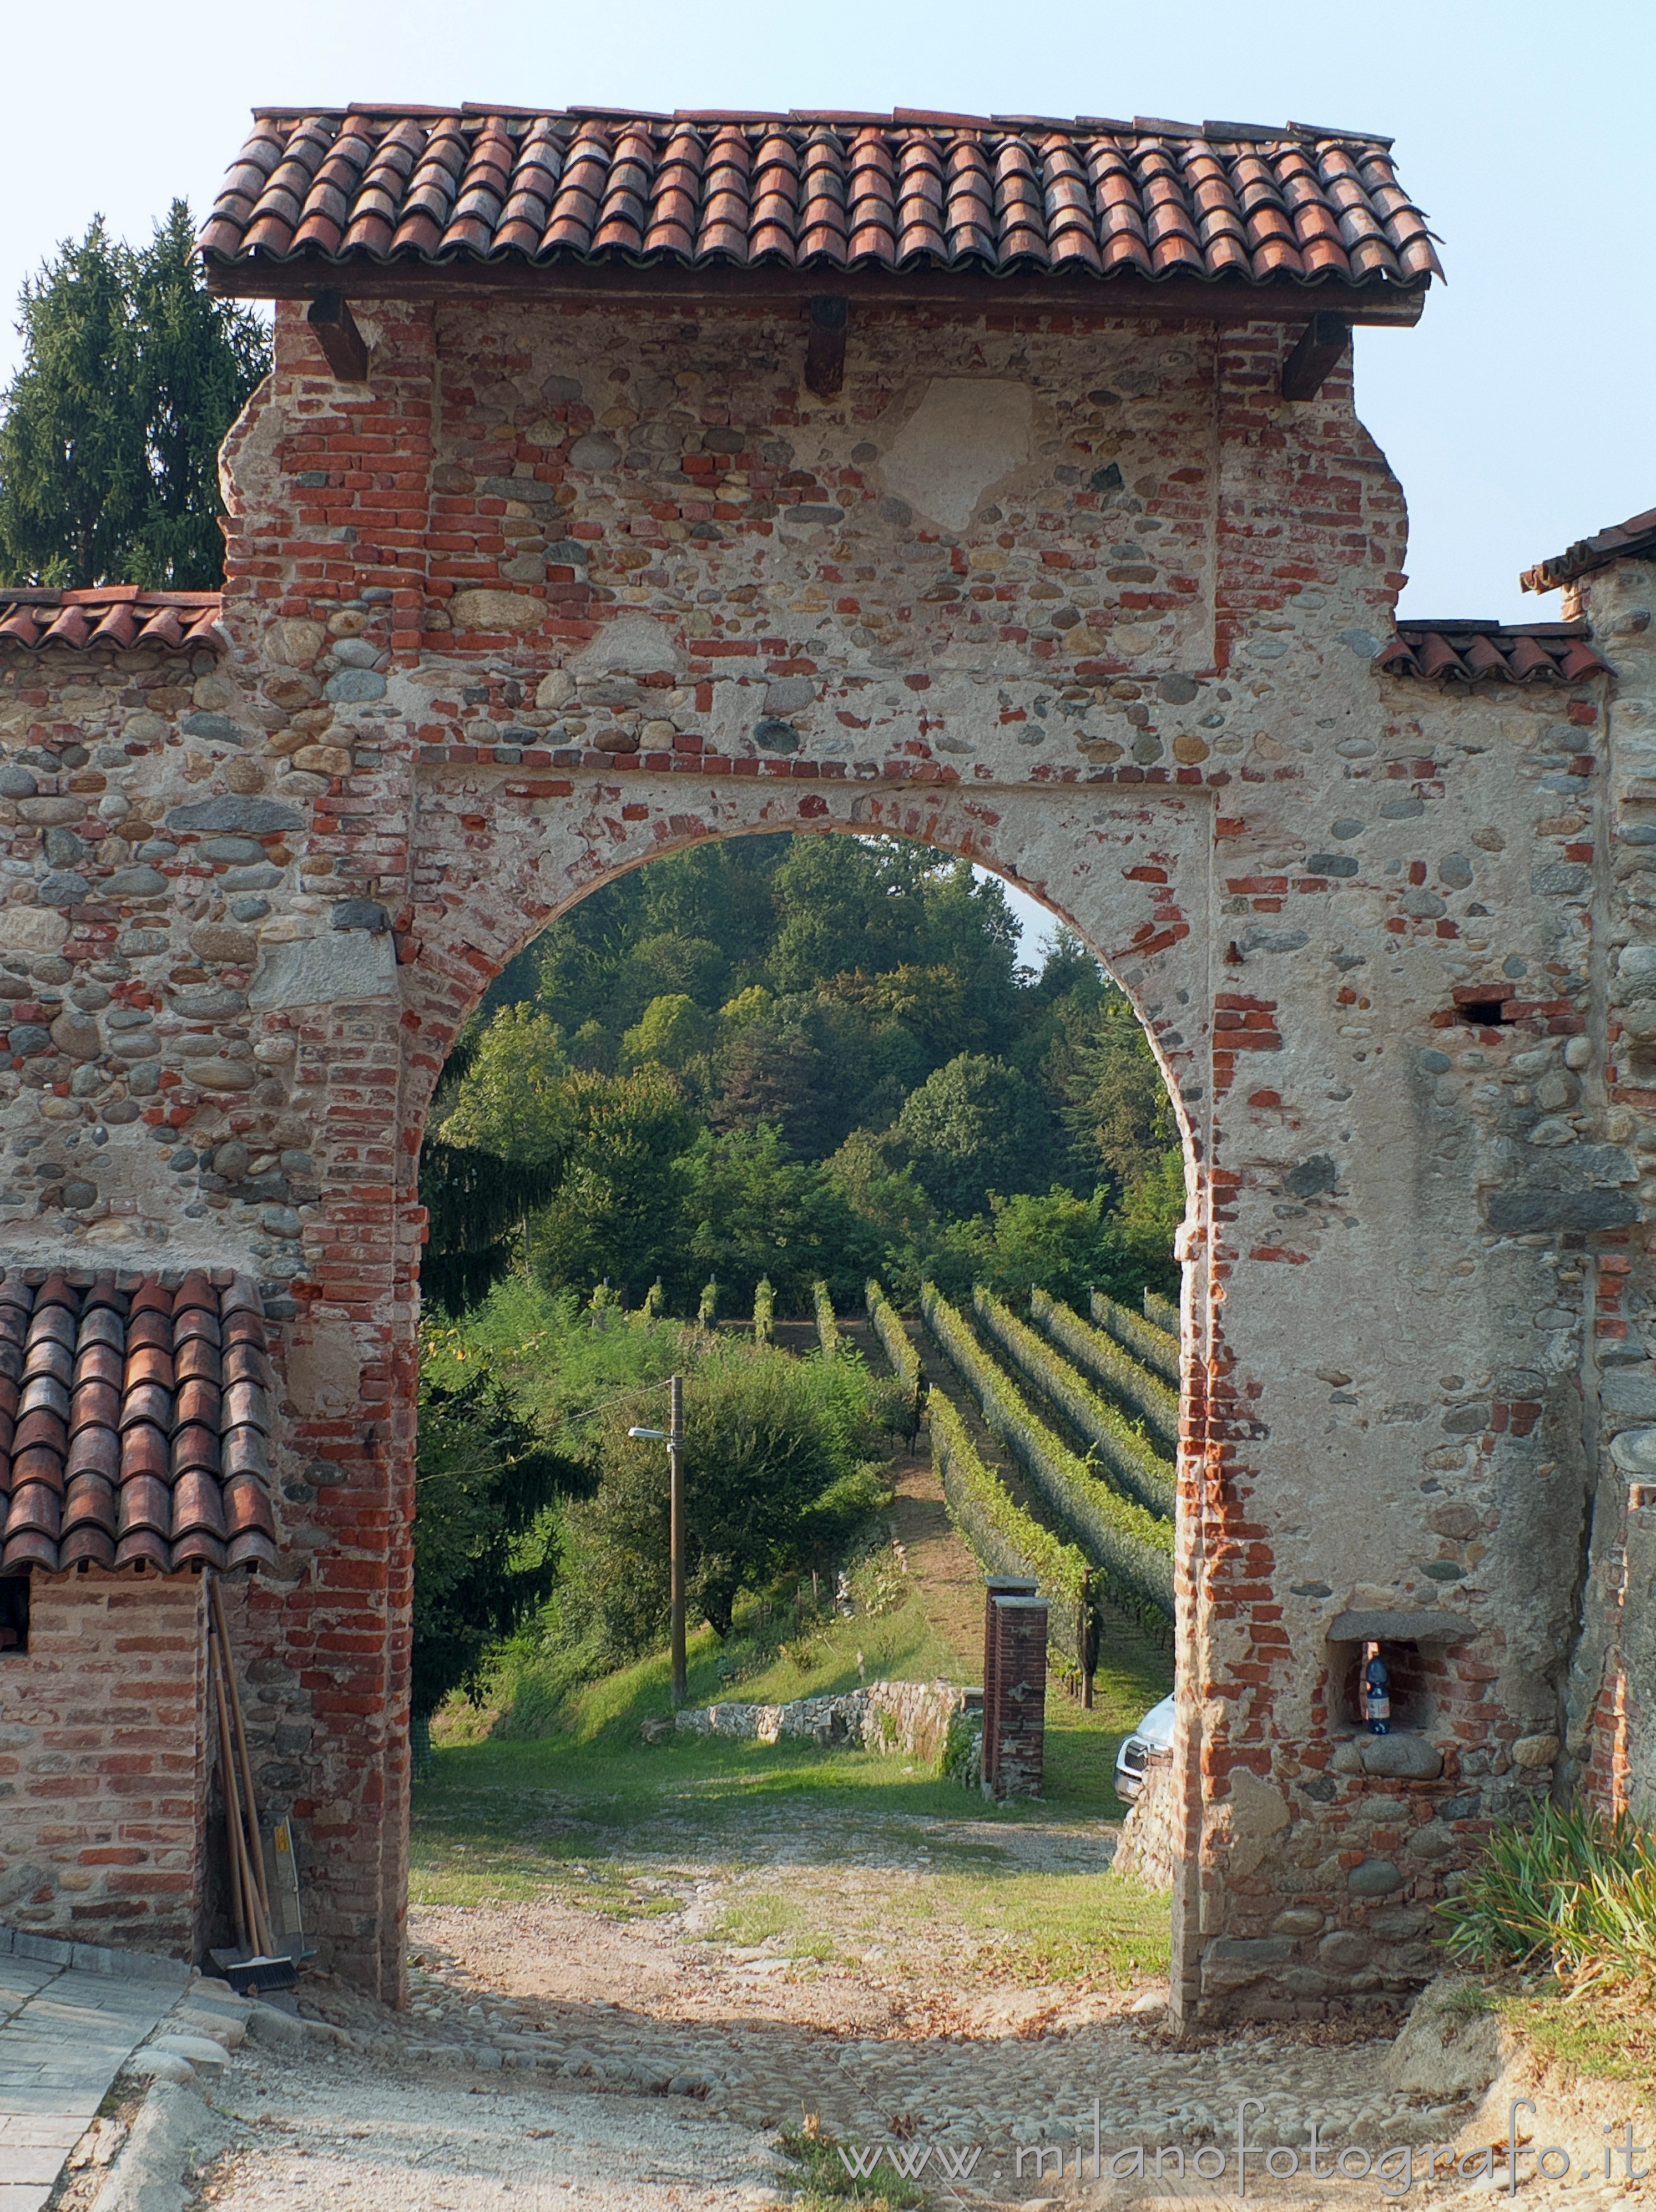 Cossato (Biella, Italy): The vineyards of Castellengo seen through the Gate of the Moor of the Castle of Castellengo - Cossato (Biella, Italy)